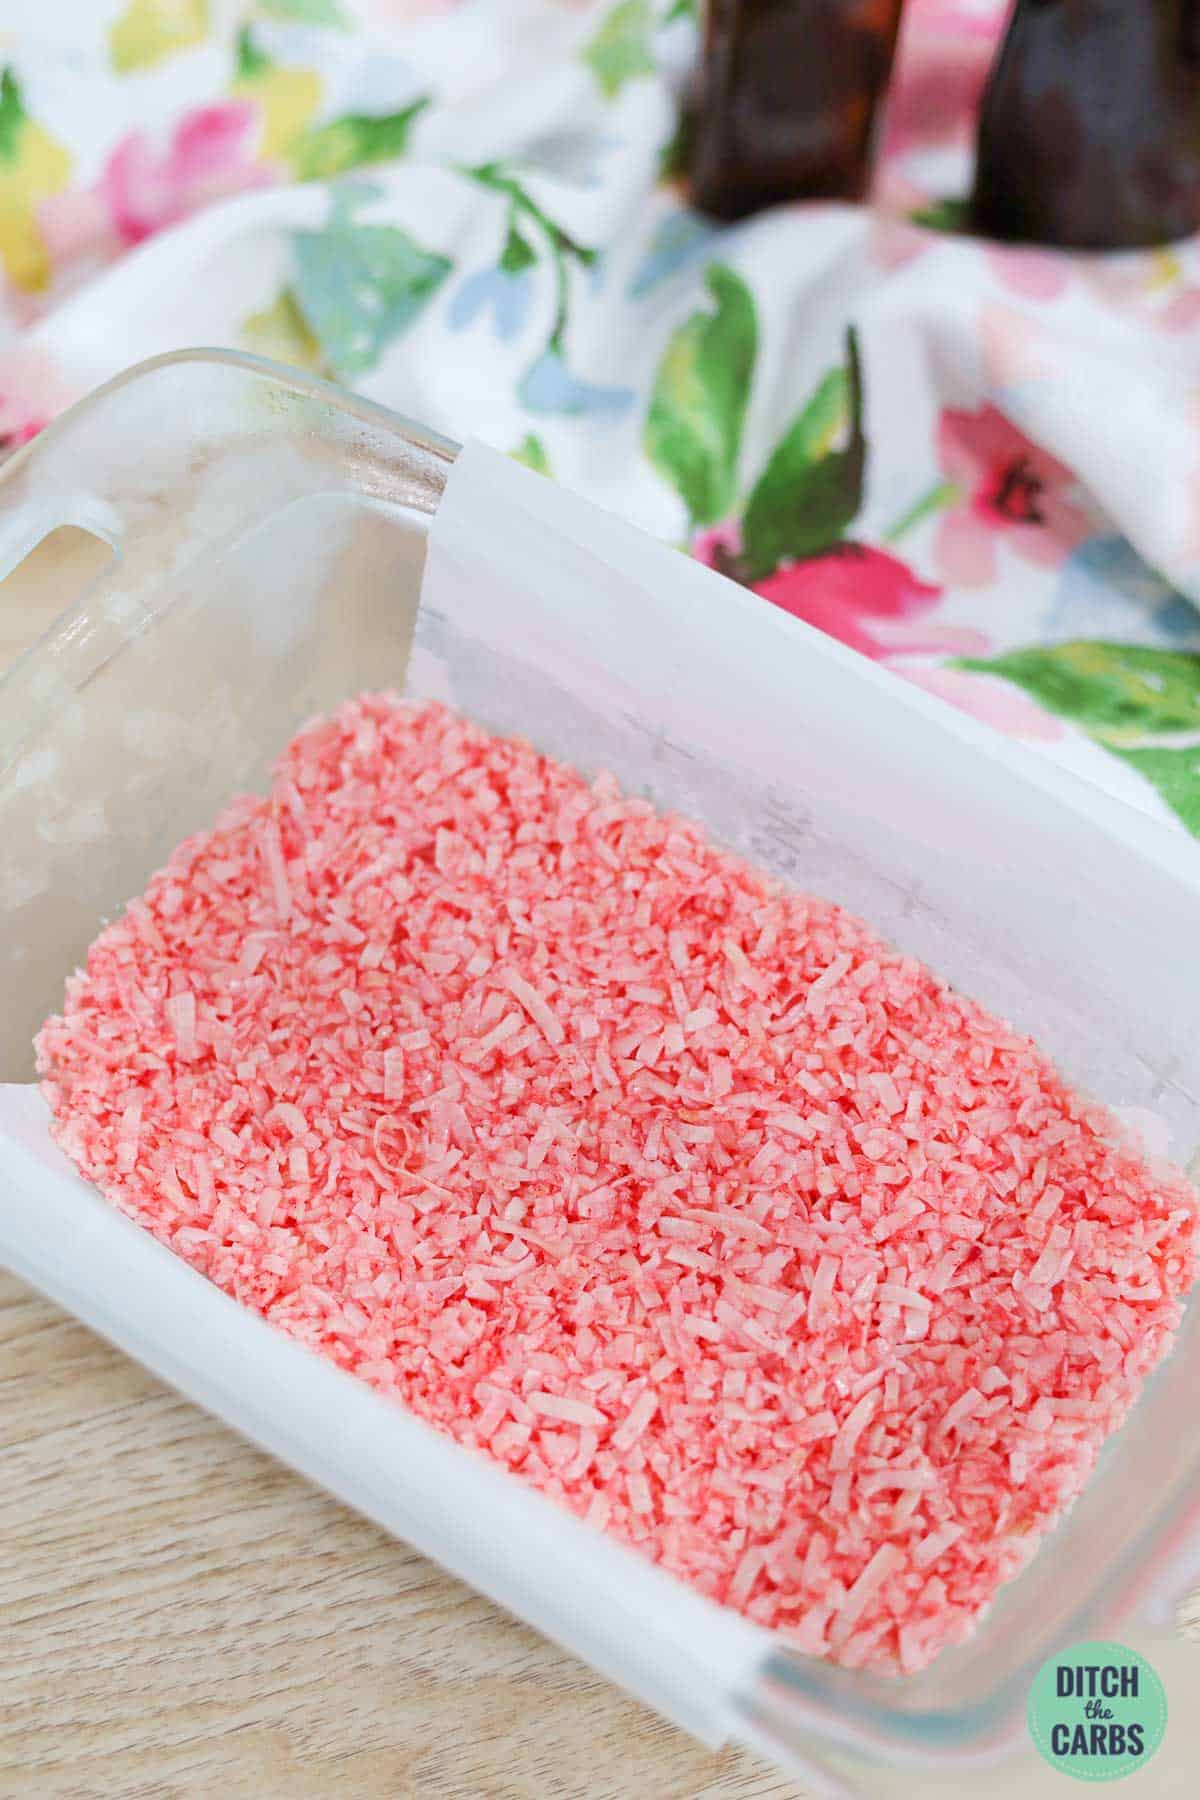 a bowl of the pink layer of coconut ice